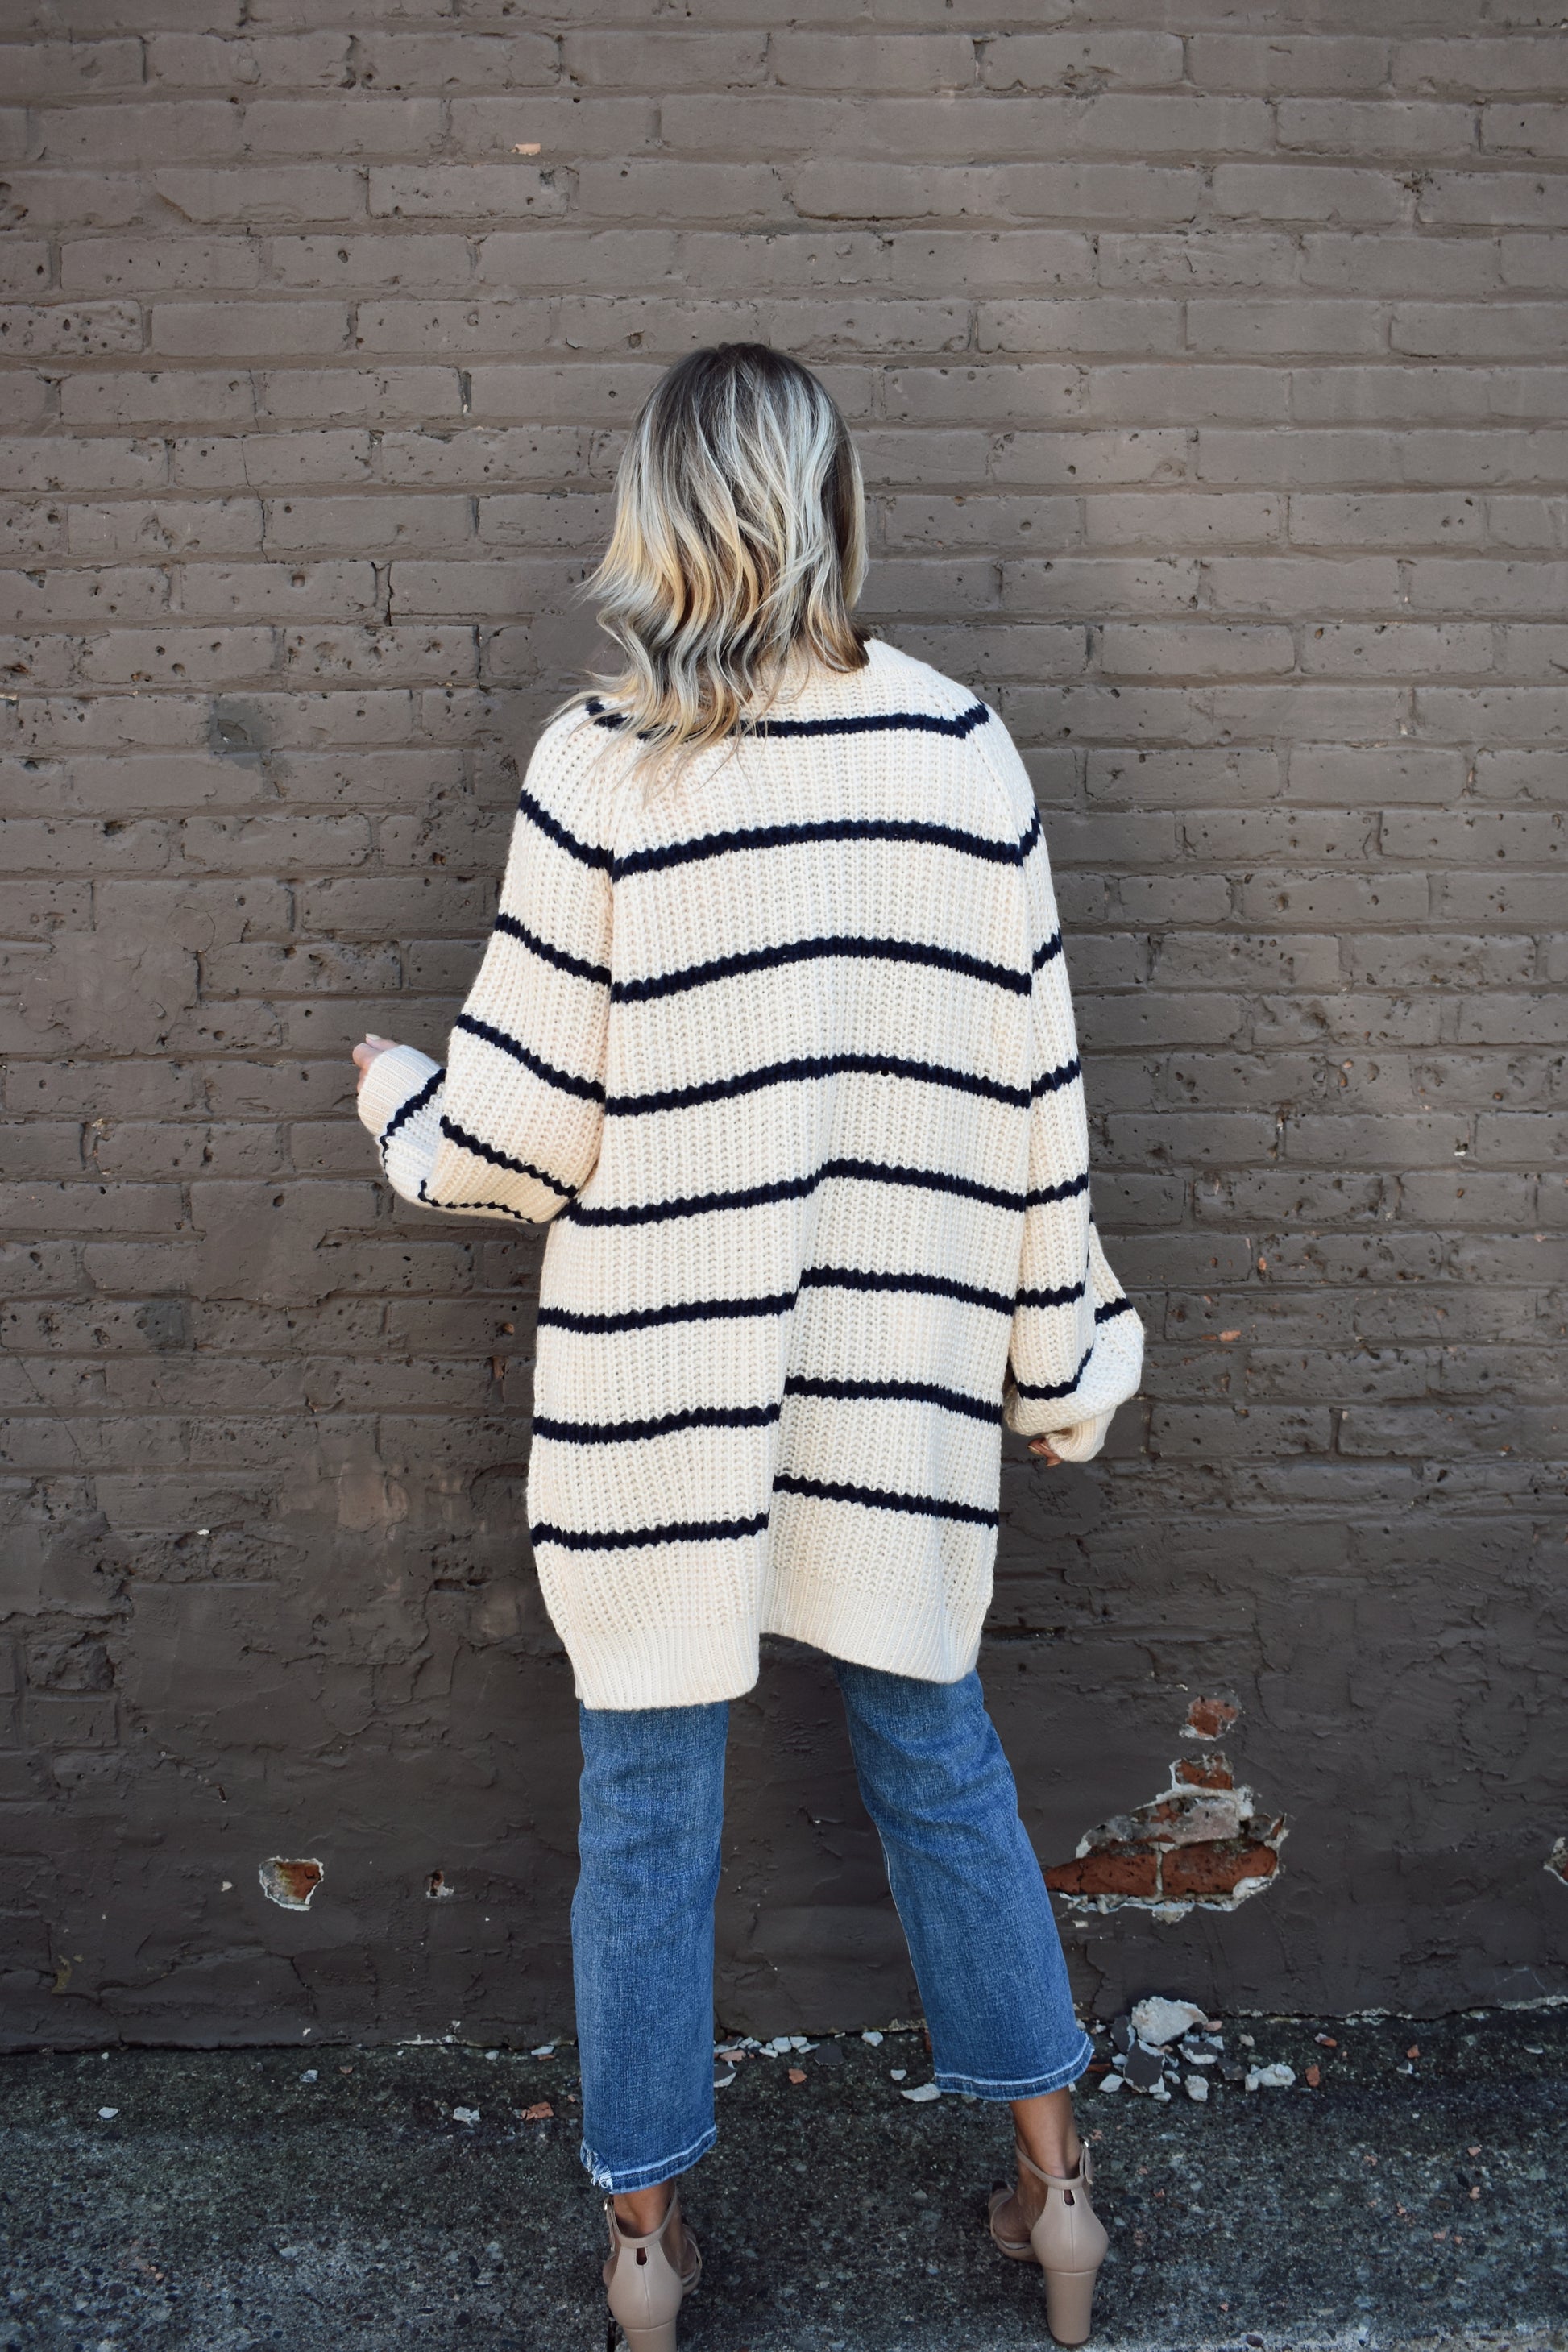 oversized long knit cardigan. cream with navy stripes. button front.